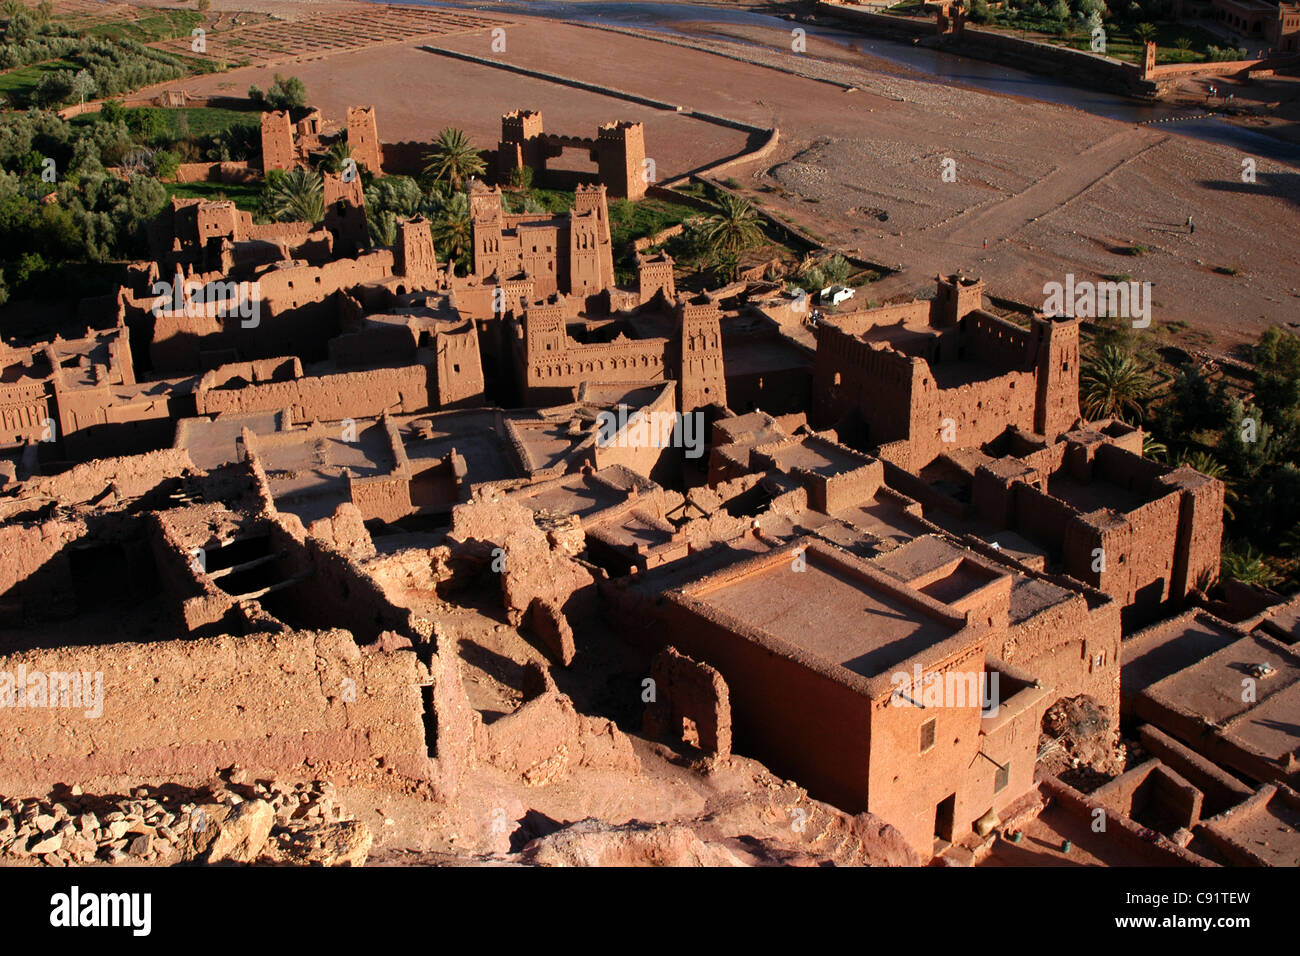 Fortified village of Ait Benhaddou in Morocco. Stock Photo